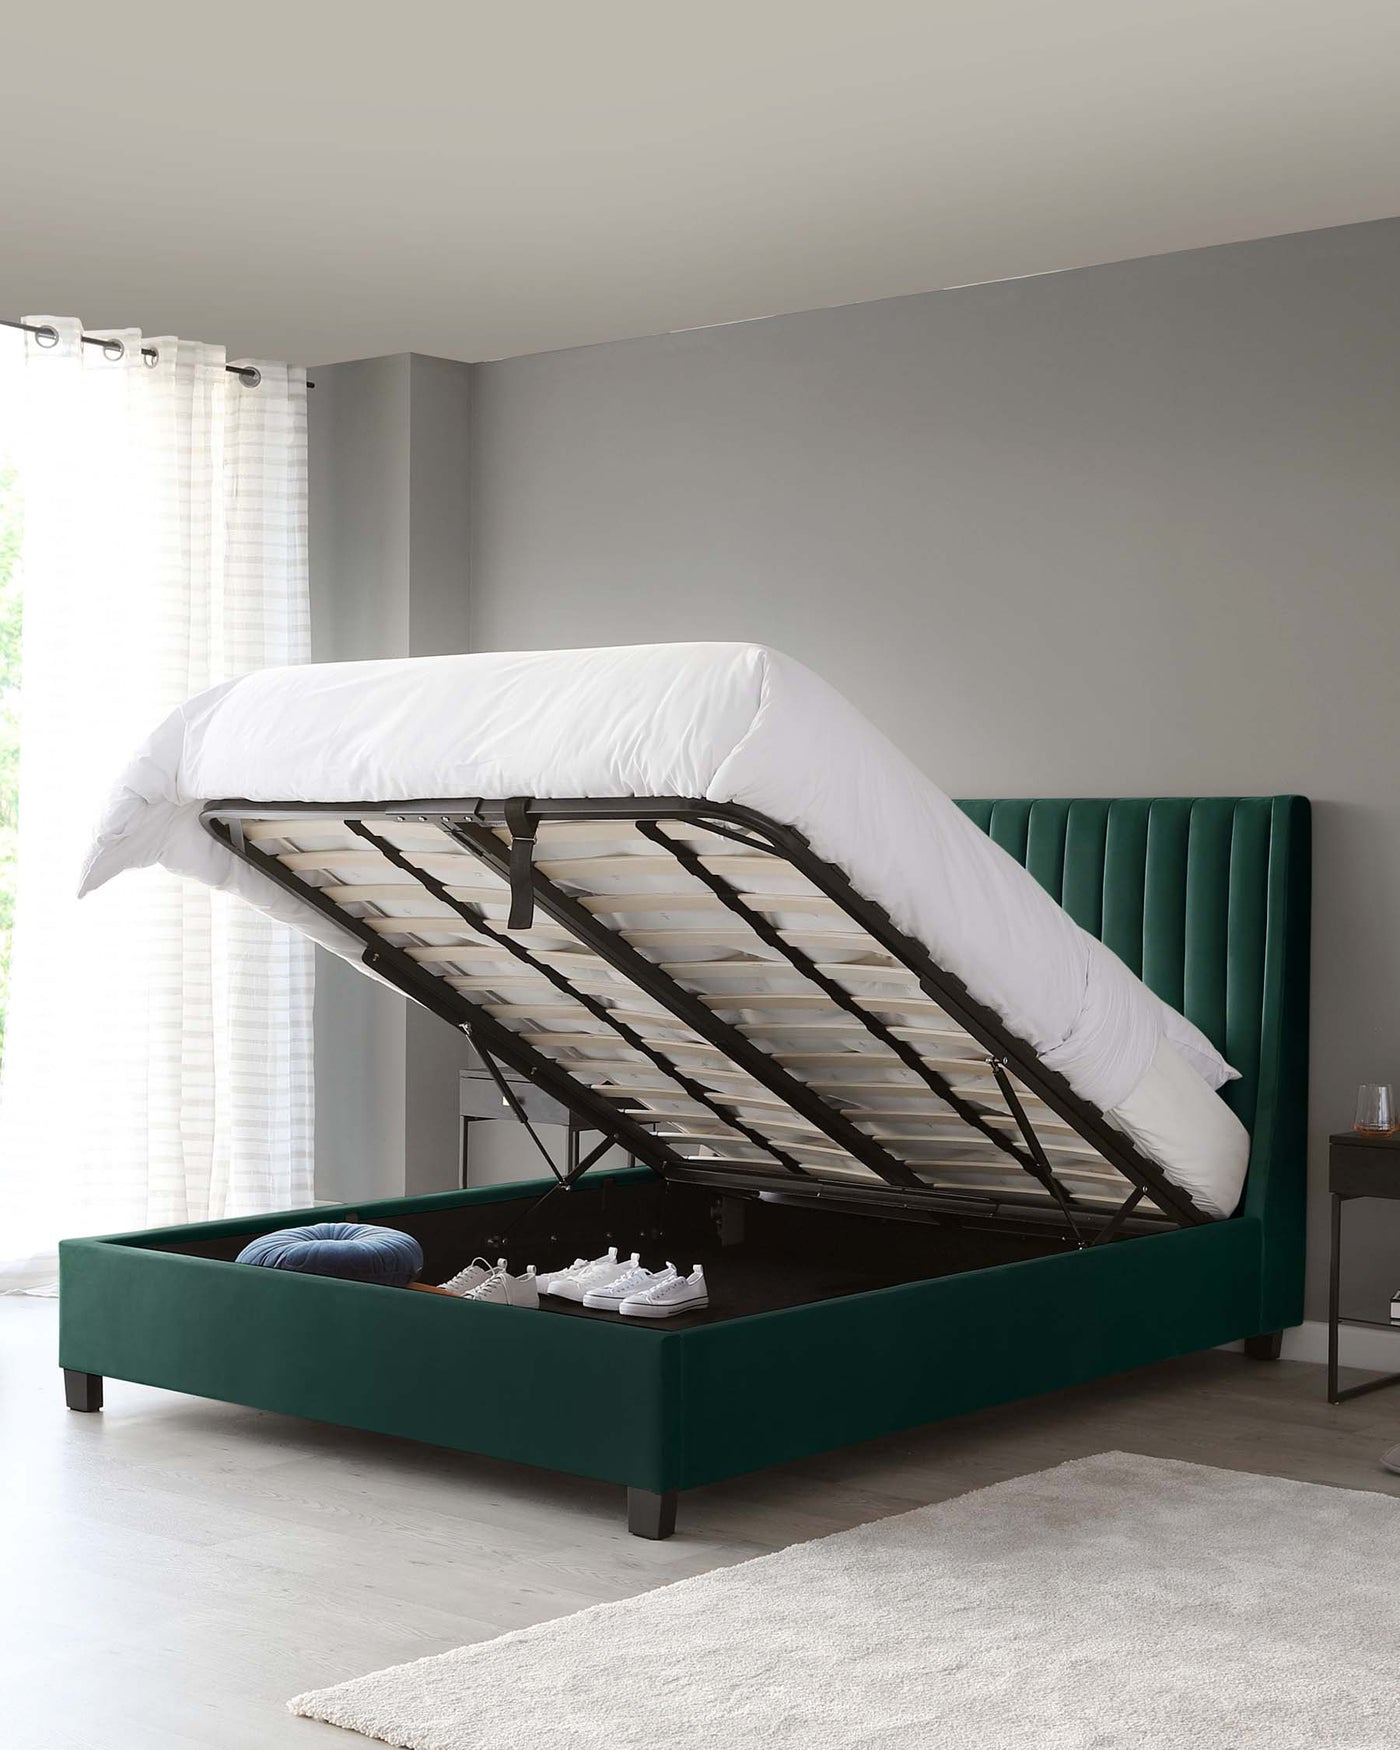 Elegant emerald green upholstered storage bed with vertical channel tufting on the headboard, featuring a gas lift mechanism that reveals a spacious under-bed storage compartment.